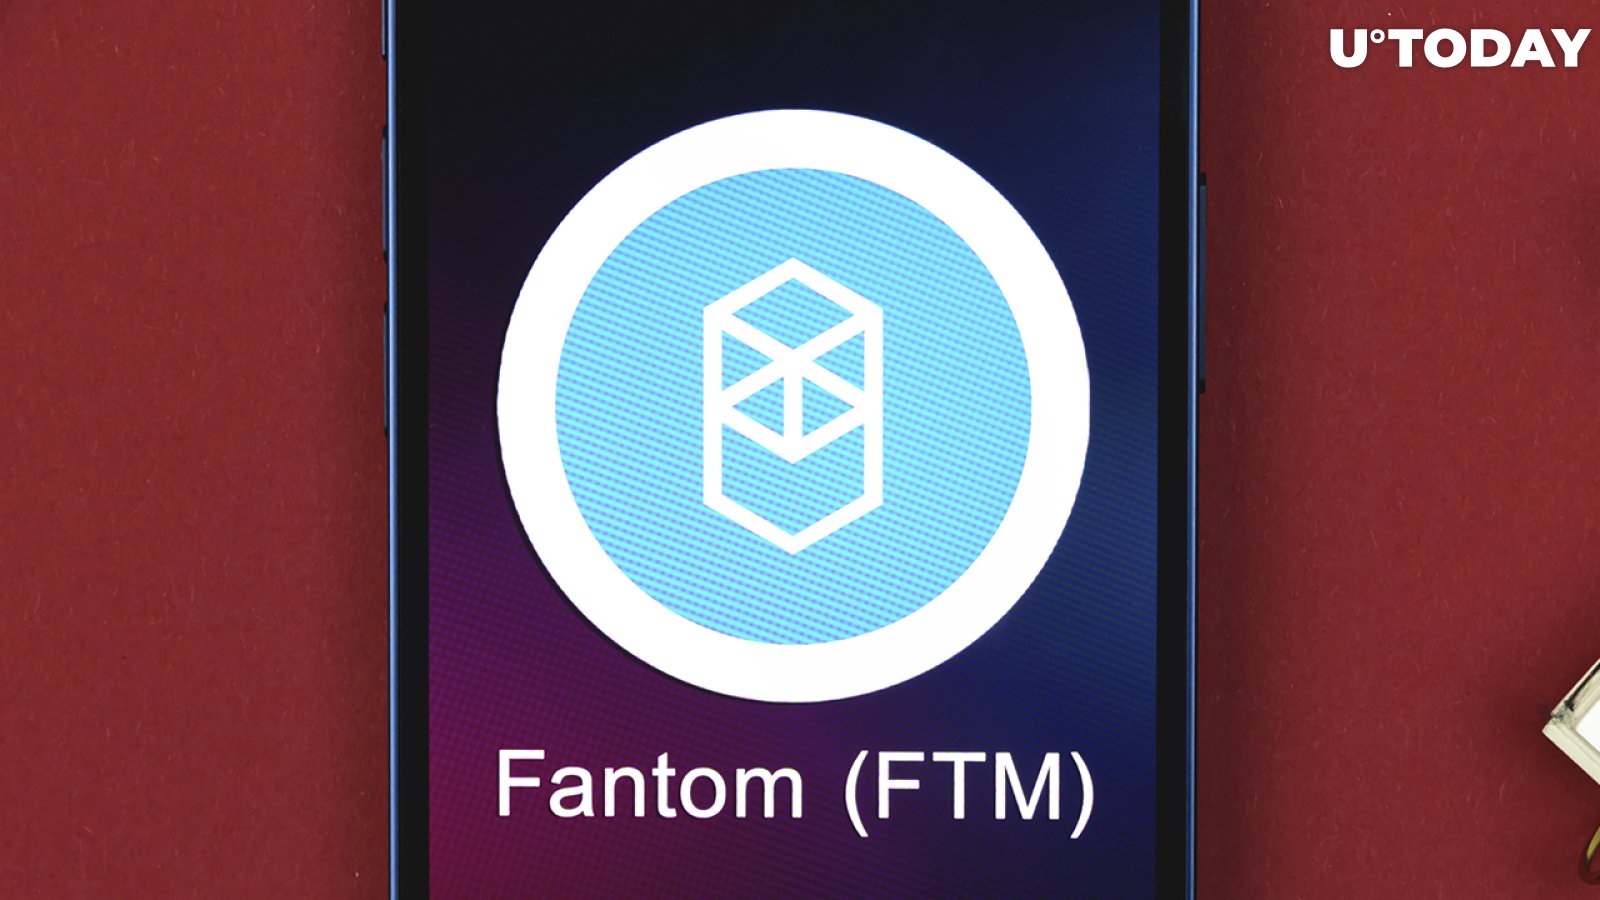 Fantom (FTM) Ready to Surpass Polygon (MATIC) by TVL. Is Avalanche (AVAX) Next?